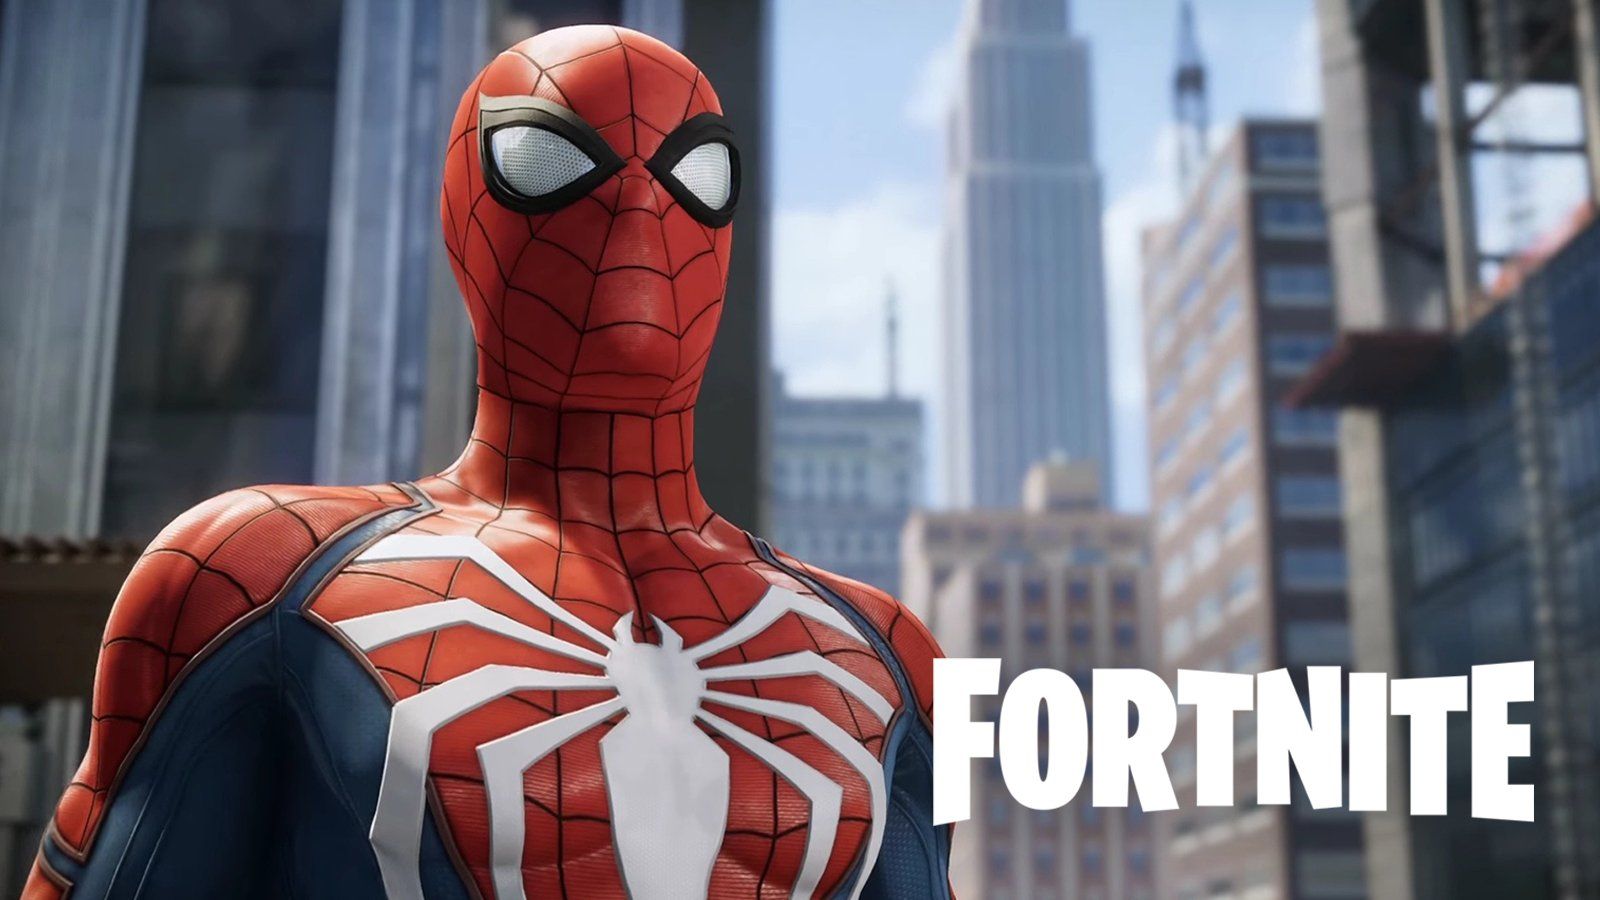 Spider Man Rumored To Be Next Marvel Hero Joining Fortnite Crossover